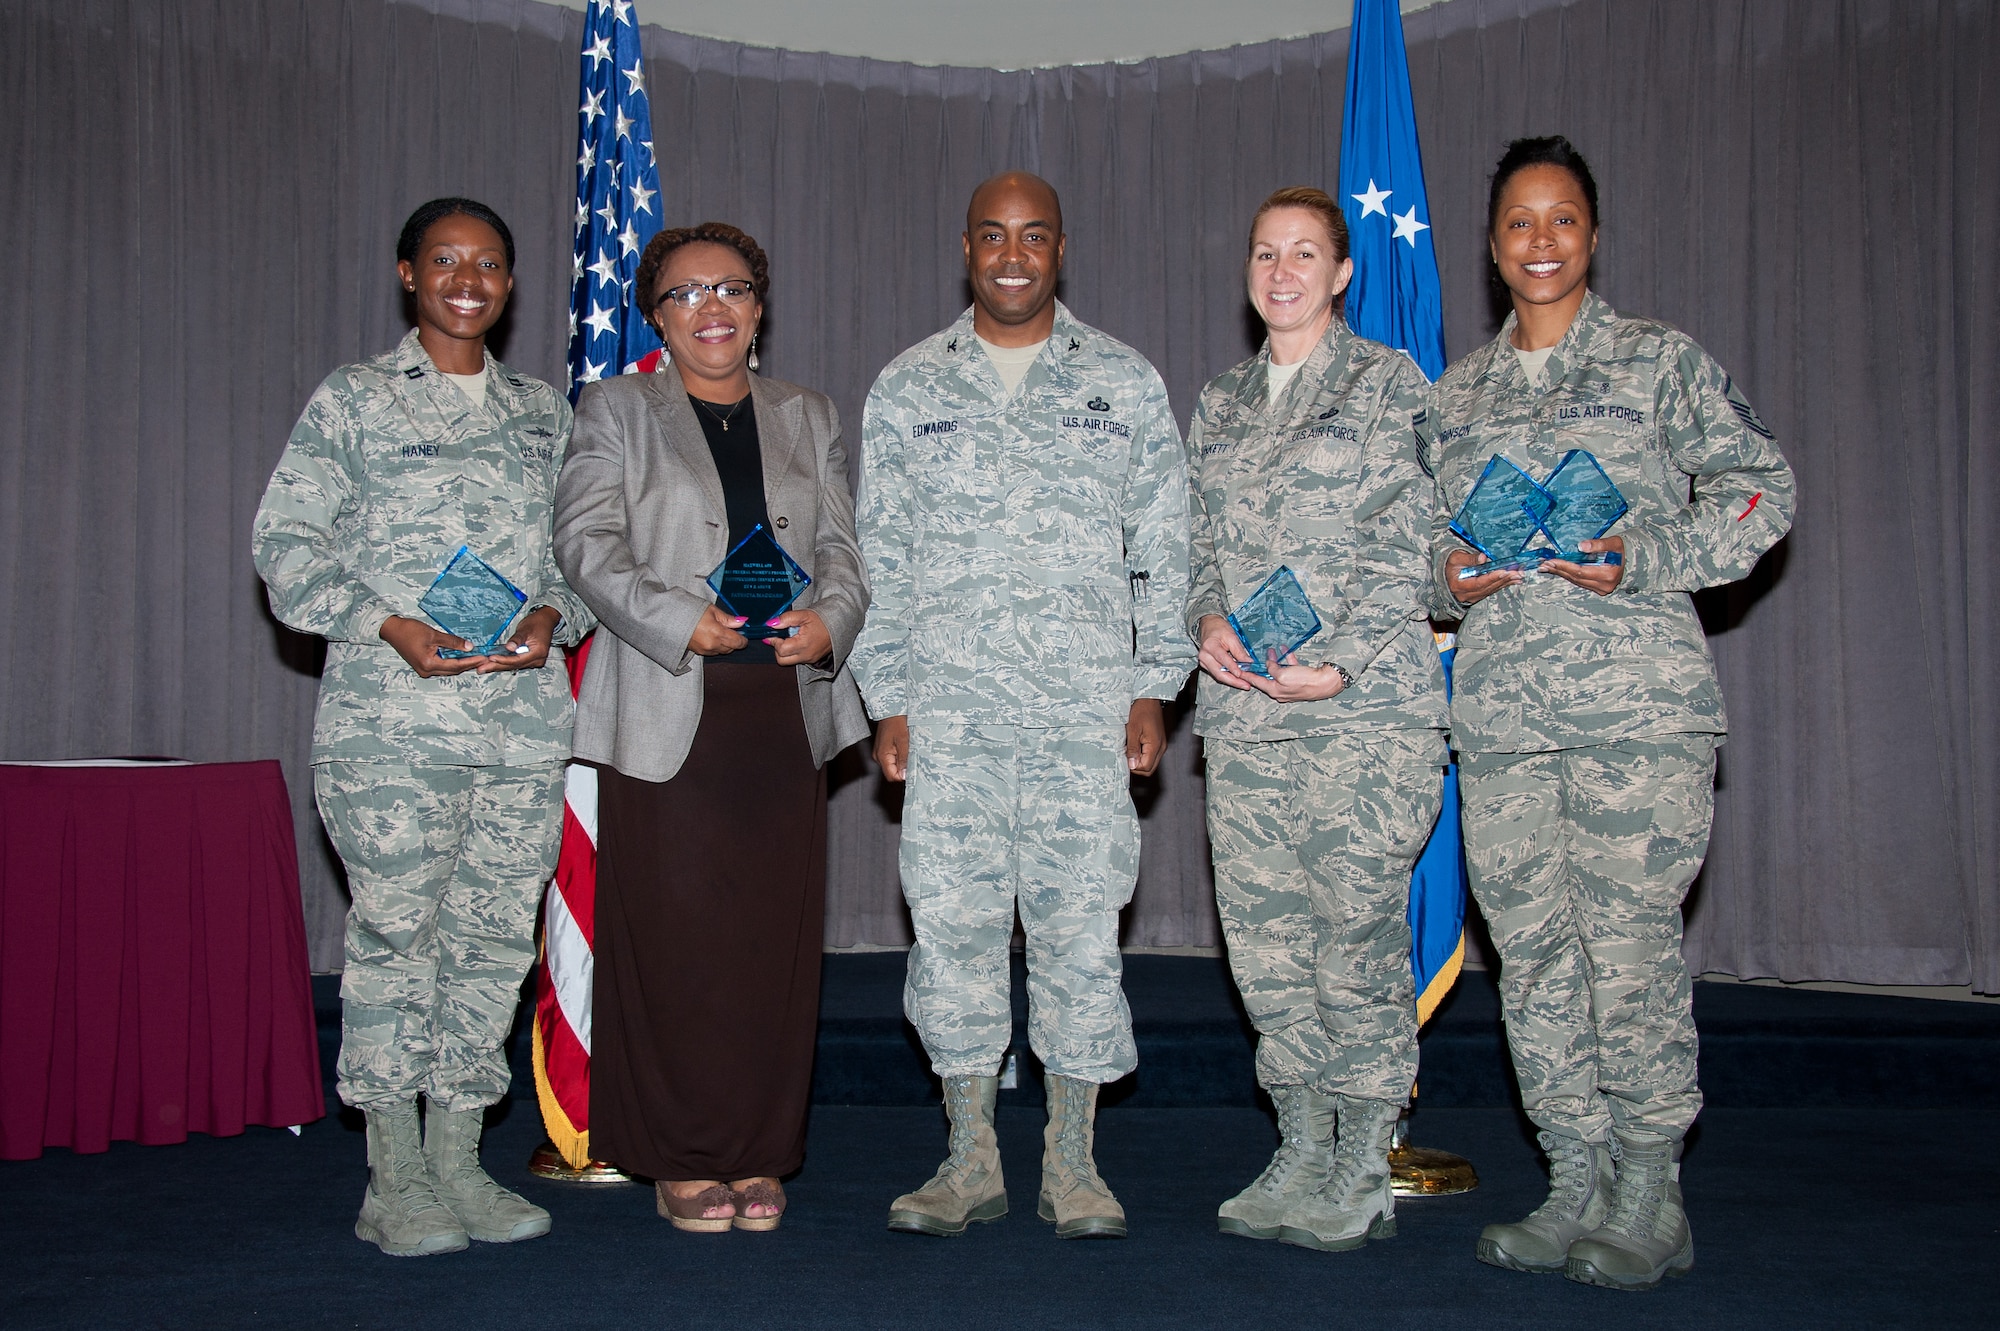 Col. Trent Edwards, commander of the 42nd Air Base Wing, center, stands with Federal Women’s Program award winners, from left, Capt. Ebony Haney, Dr. Patricia Maggard, Senior Master Sgt. Karen Plunkett and Master Sgt. Tammy Robinson.The FWP recognized women in the community for their leadership and service efforts during a luncheon Aug. 23 at the Maxwell Club.